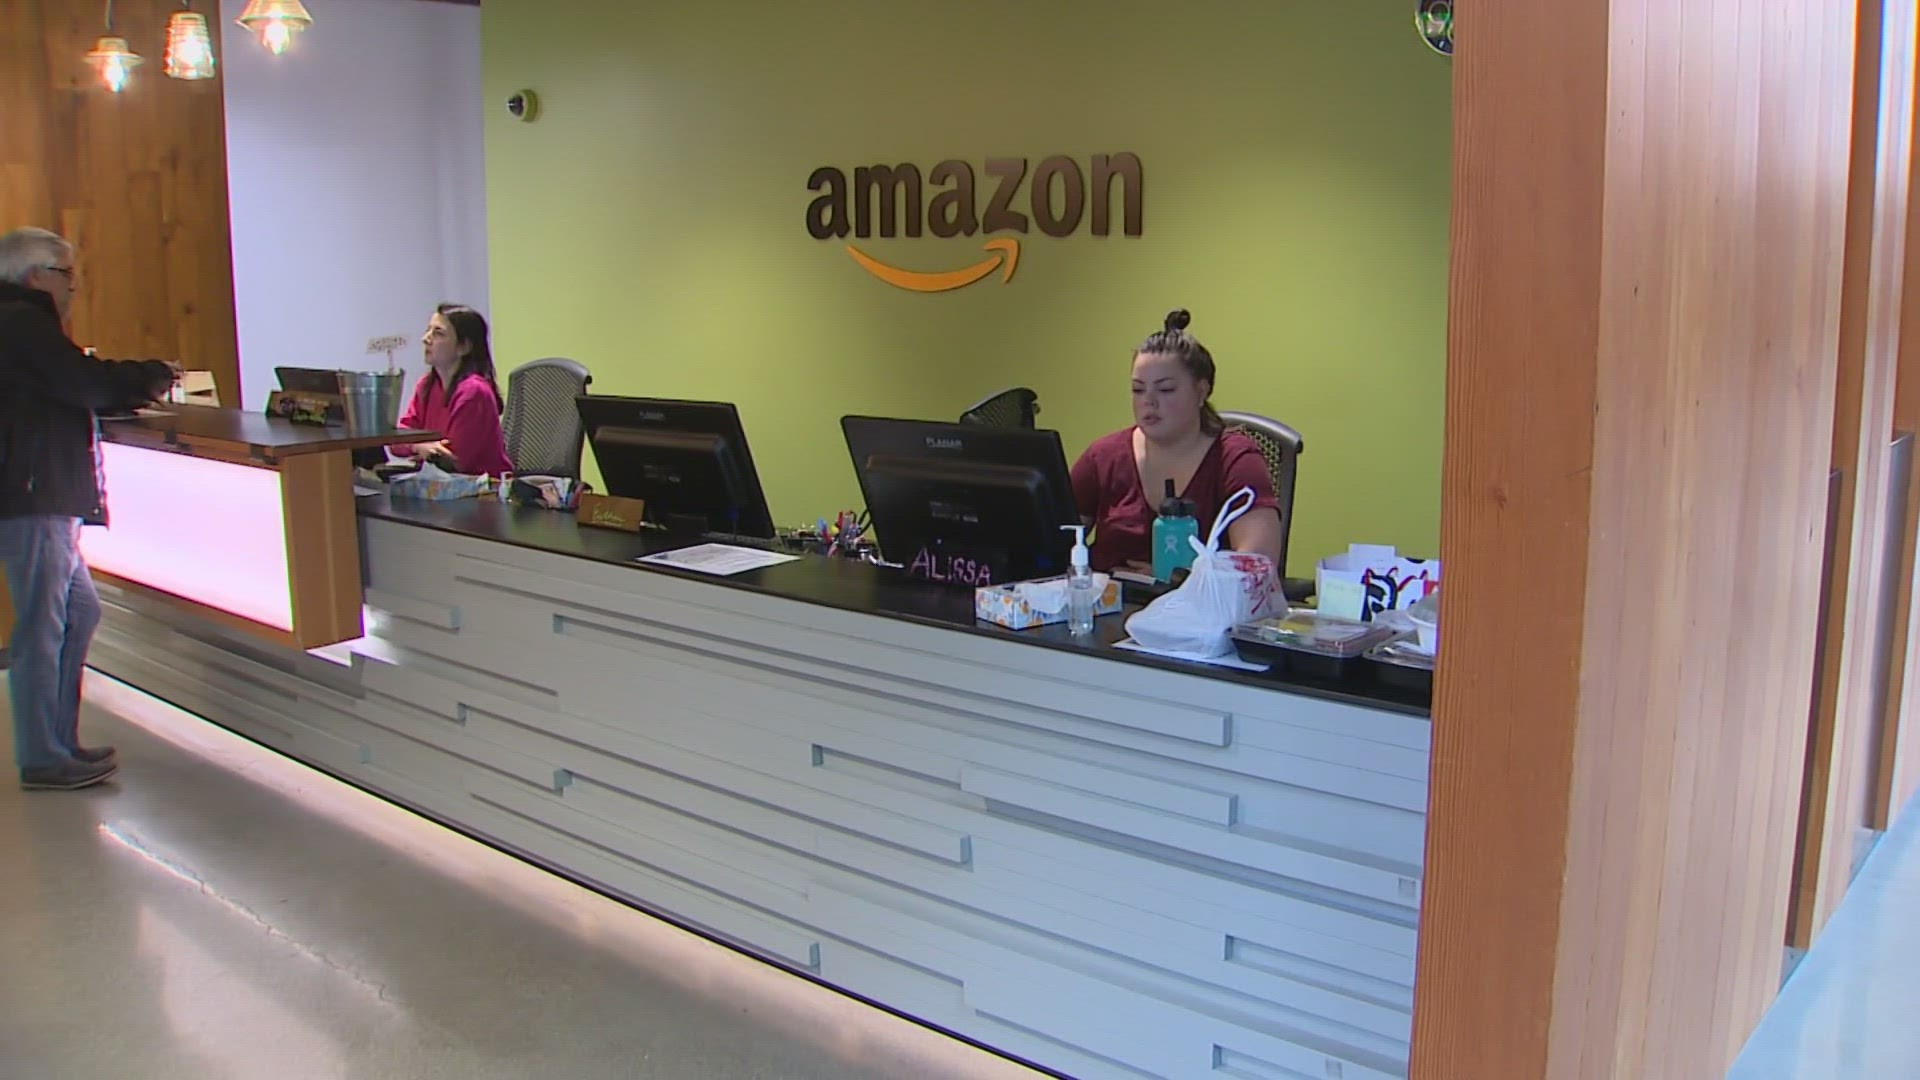 After being asked to move, one current Amazon employee told KING 5 she now faces a frustrating dilemma, but the company said they believe the policy is for the best.